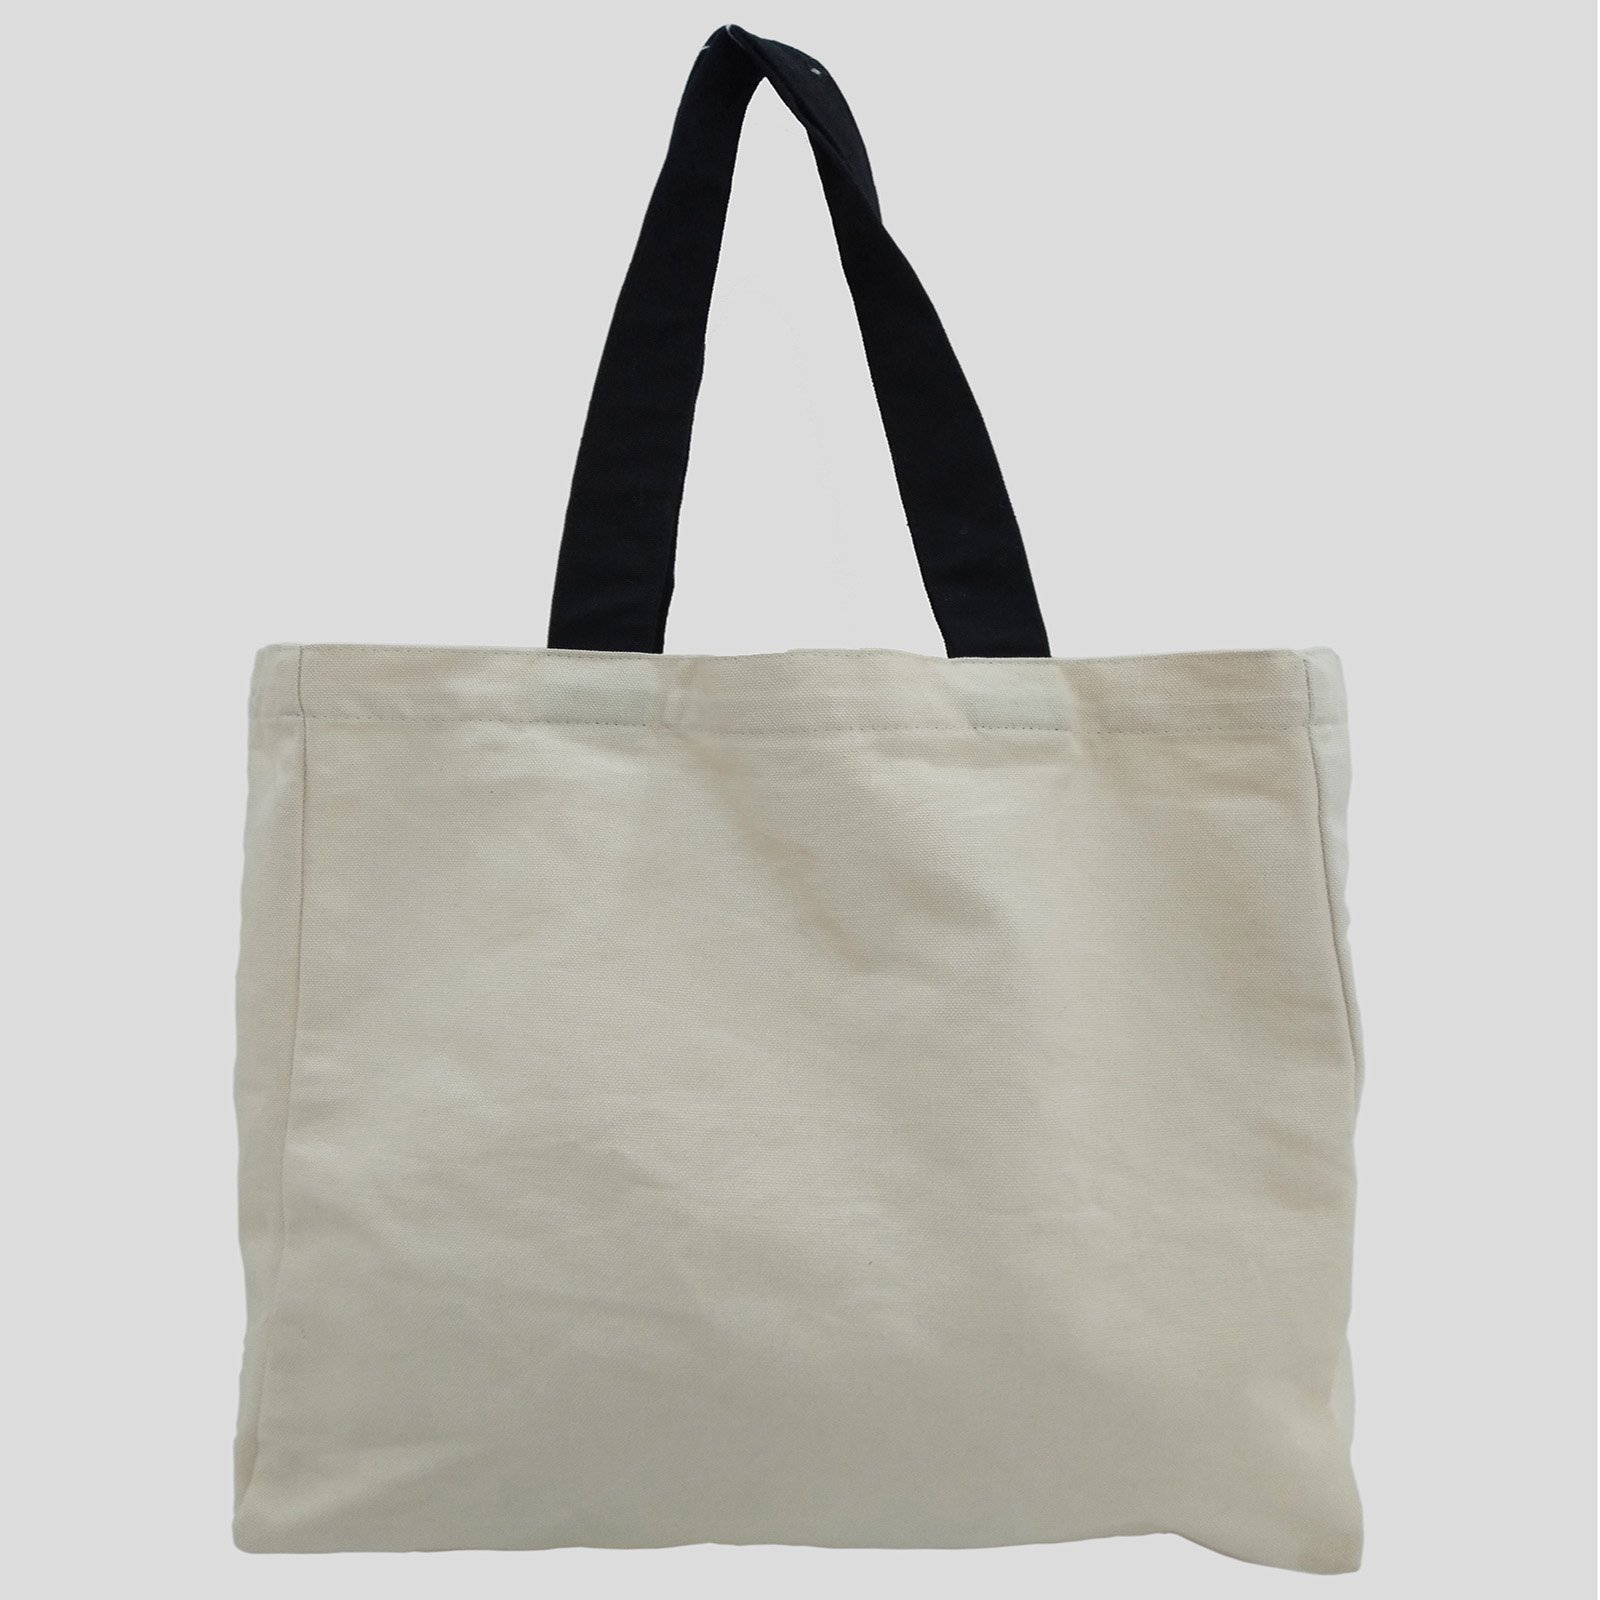 Wholesale cheapest canvas tote bag for women | Ecobags